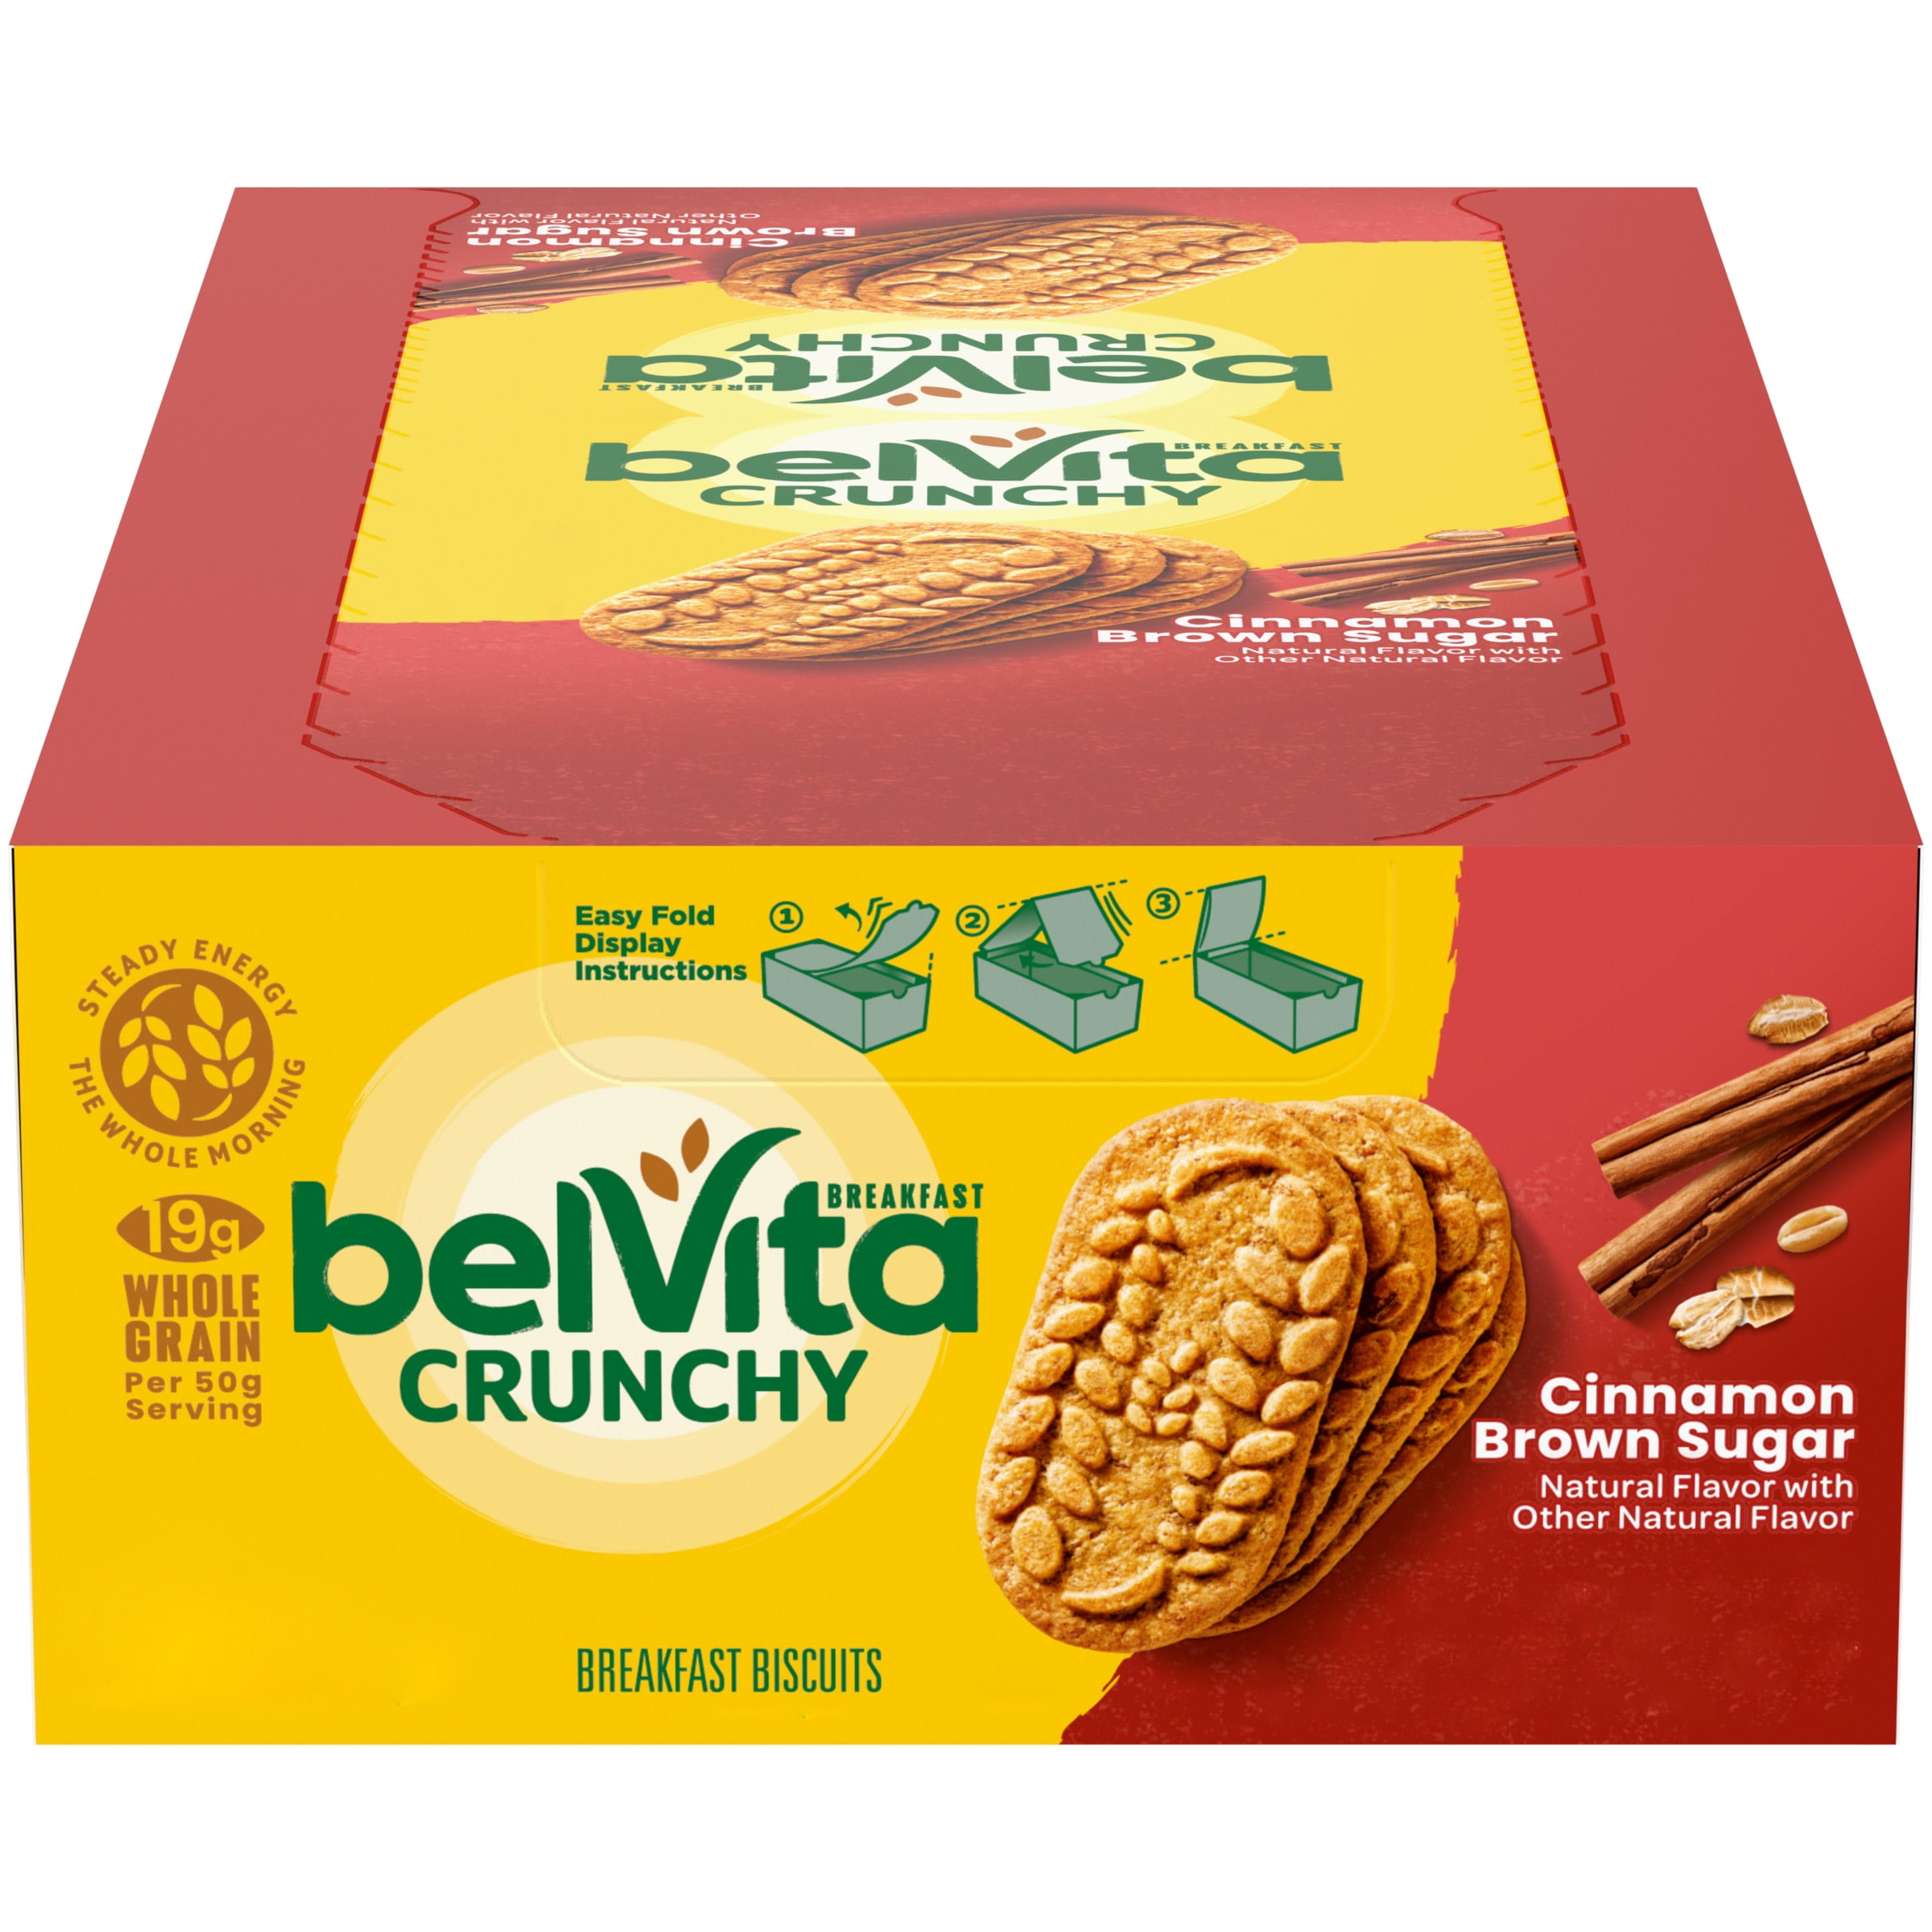 Drop your morning routine ⬇️ Ours start with belvita biscuits 😋